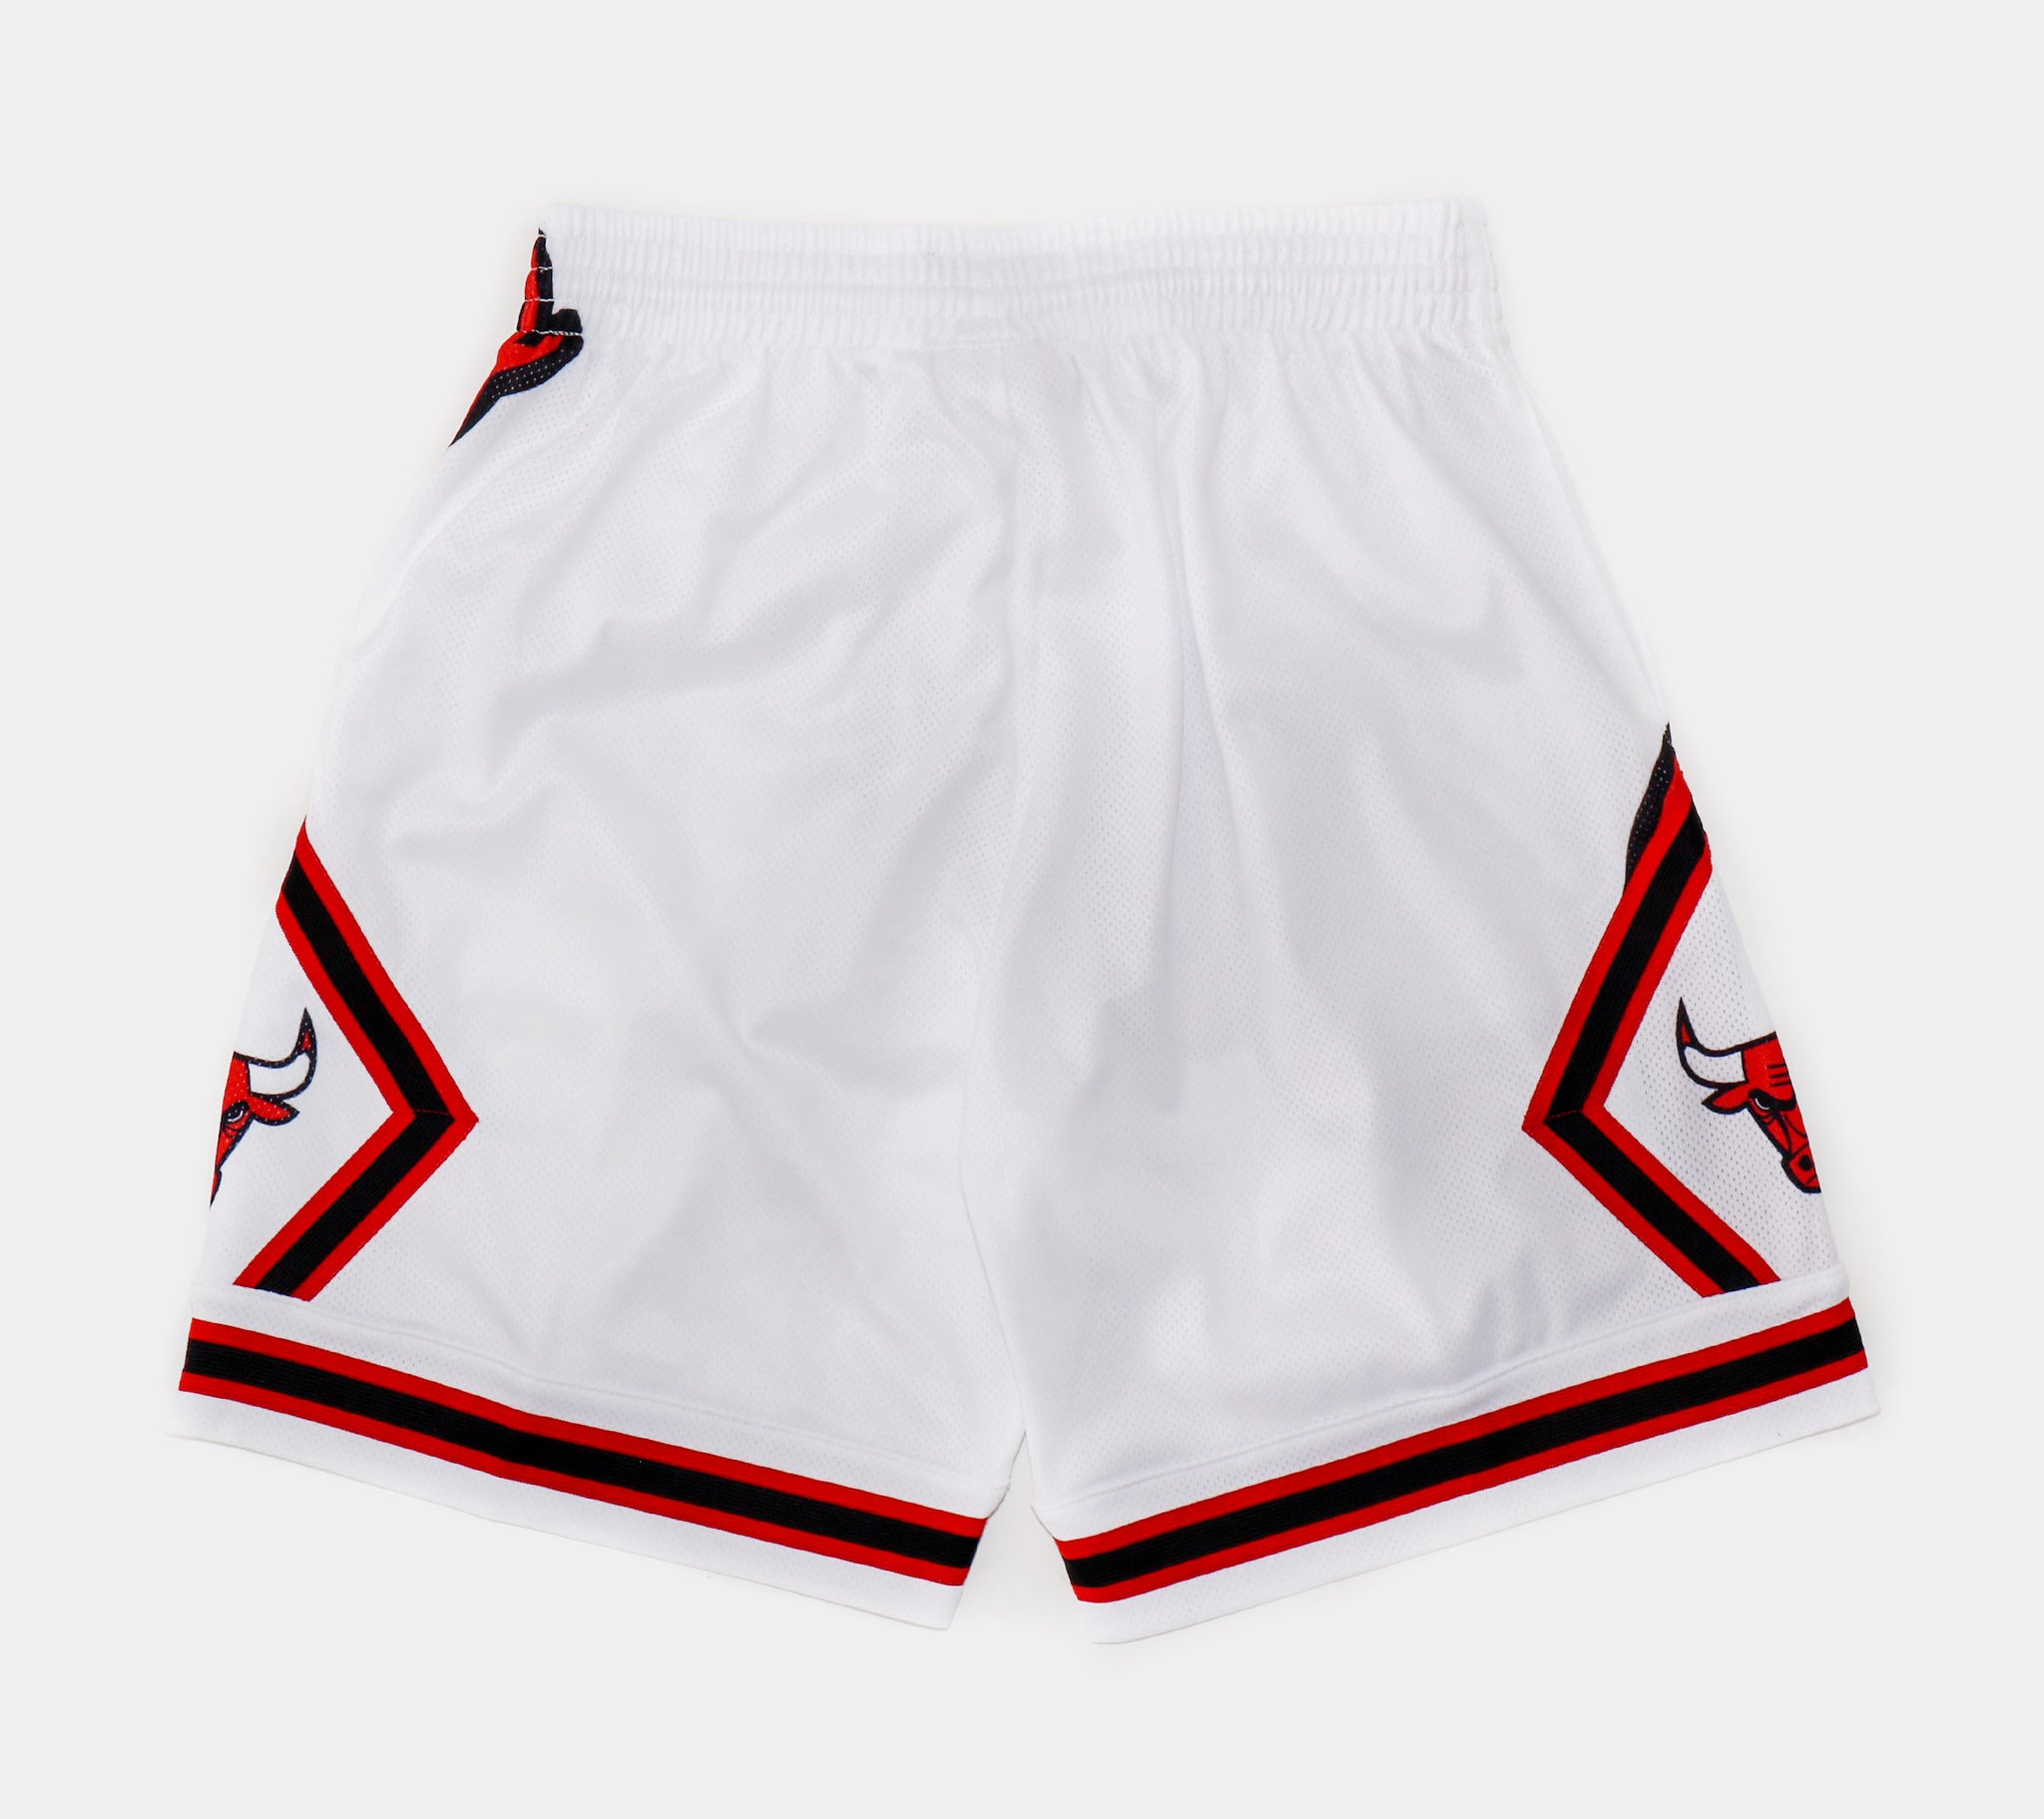 Nike Chicago Bulls Icon Edition Authentic Men's Nba Shorts in Red for Men